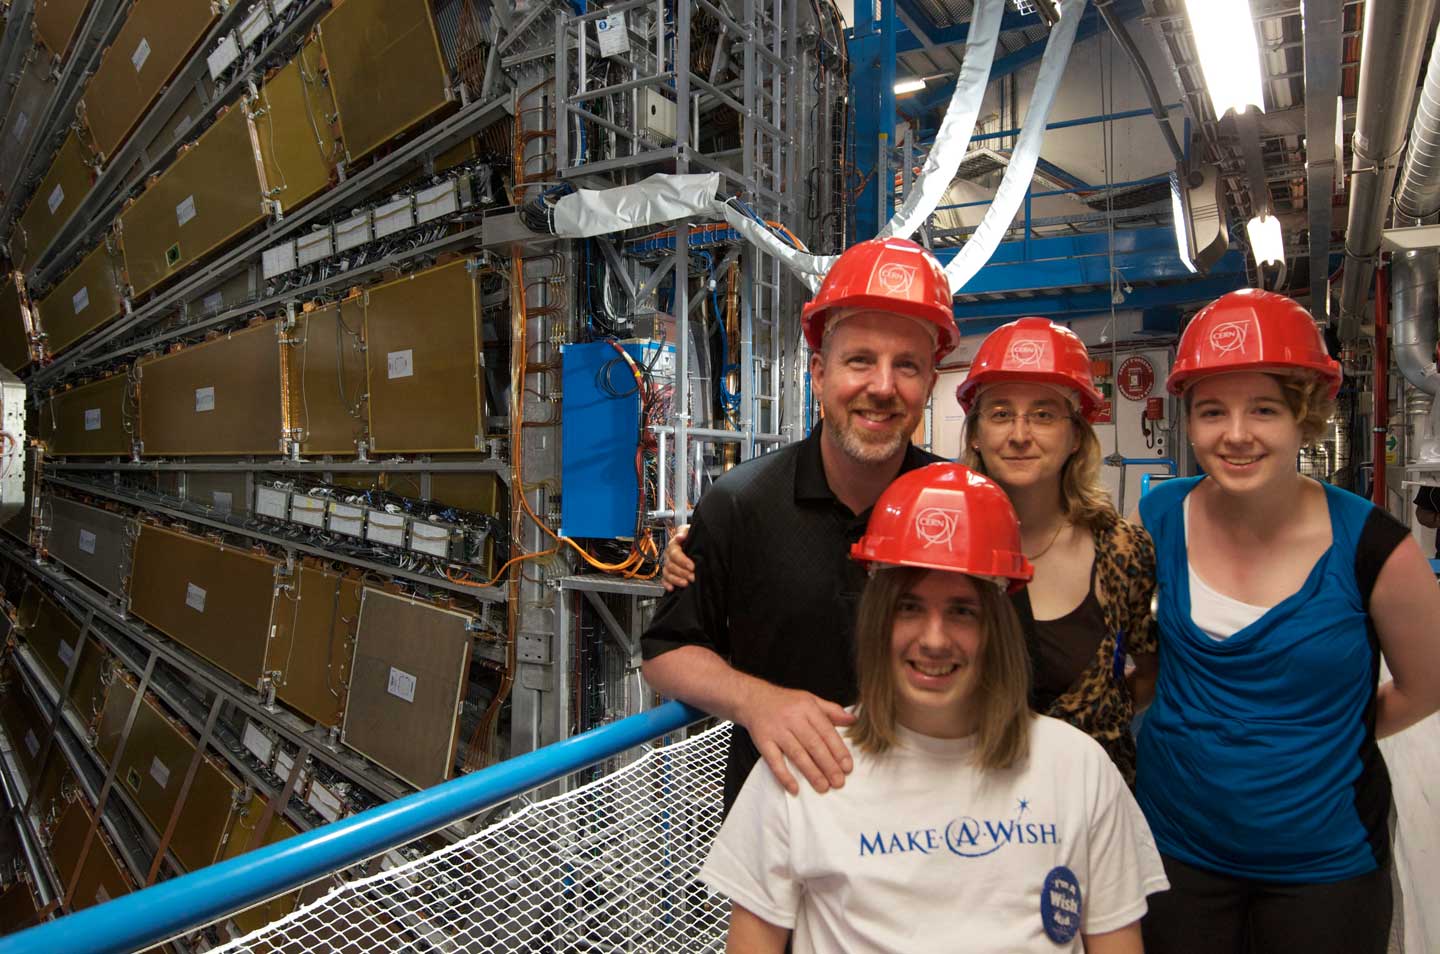 Visiting CERN for more than just the logical stuff